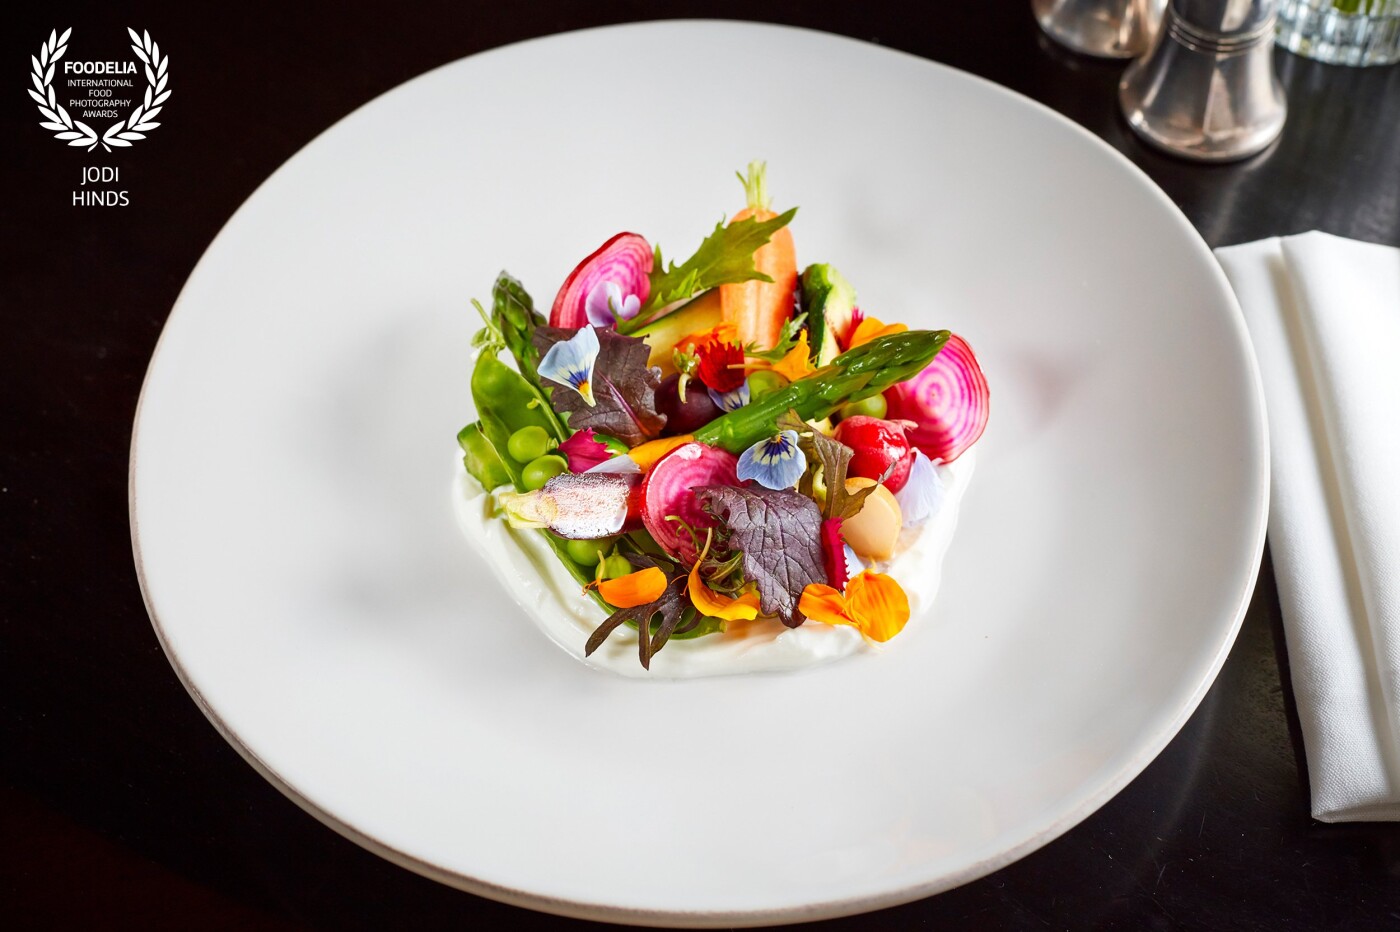 Stunning salad for the Royal Chelsea Flower Show menu at Home House, London by the talented Chef Sophie Michell<br />
<br />
Chef: @sophiemichell<br />
Venue: @homehouse<br />
Photography: @jodihindsphoto<br />
